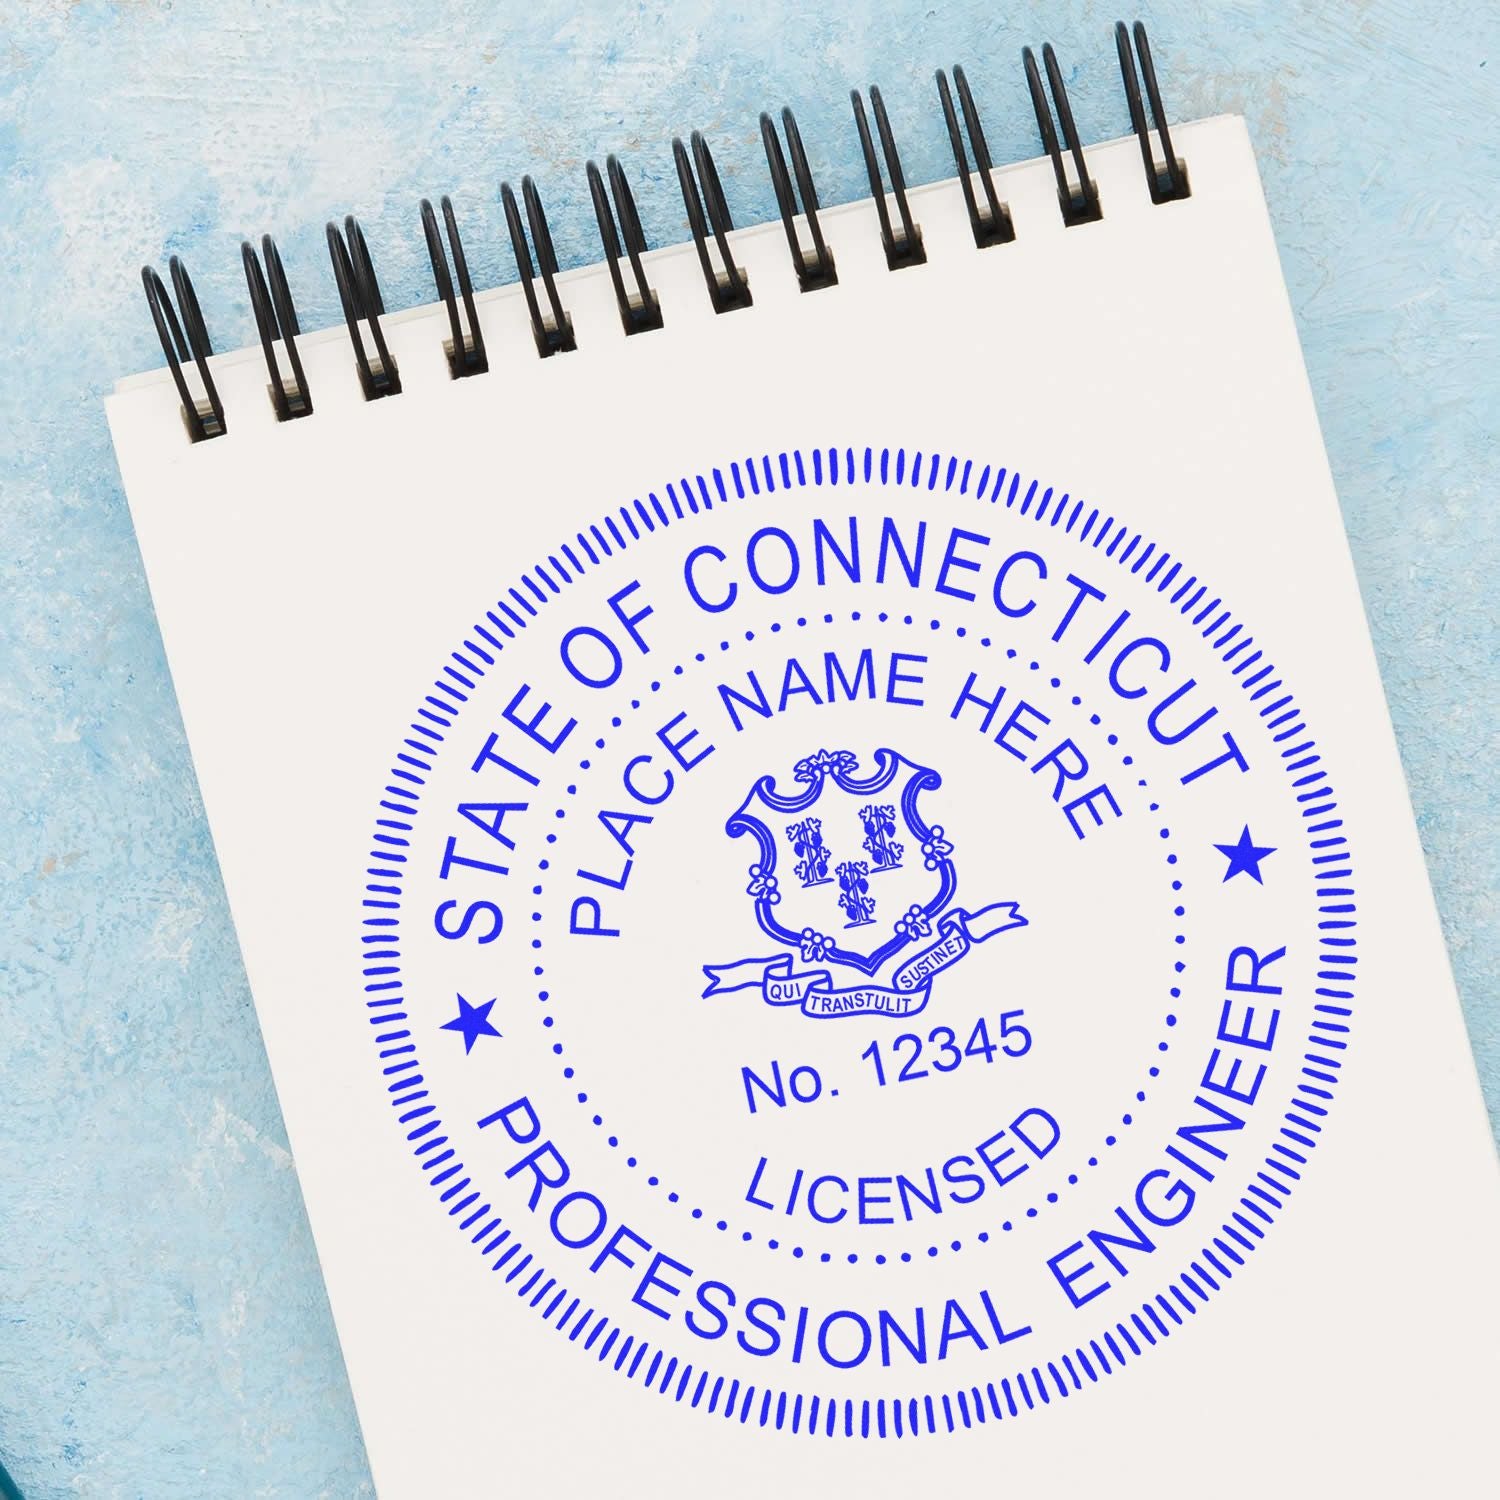 The Self-Inking Connecticut PE Stamp stamp impression comes to life with a crisp, detailed photo on paper - showcasing true professional quality.